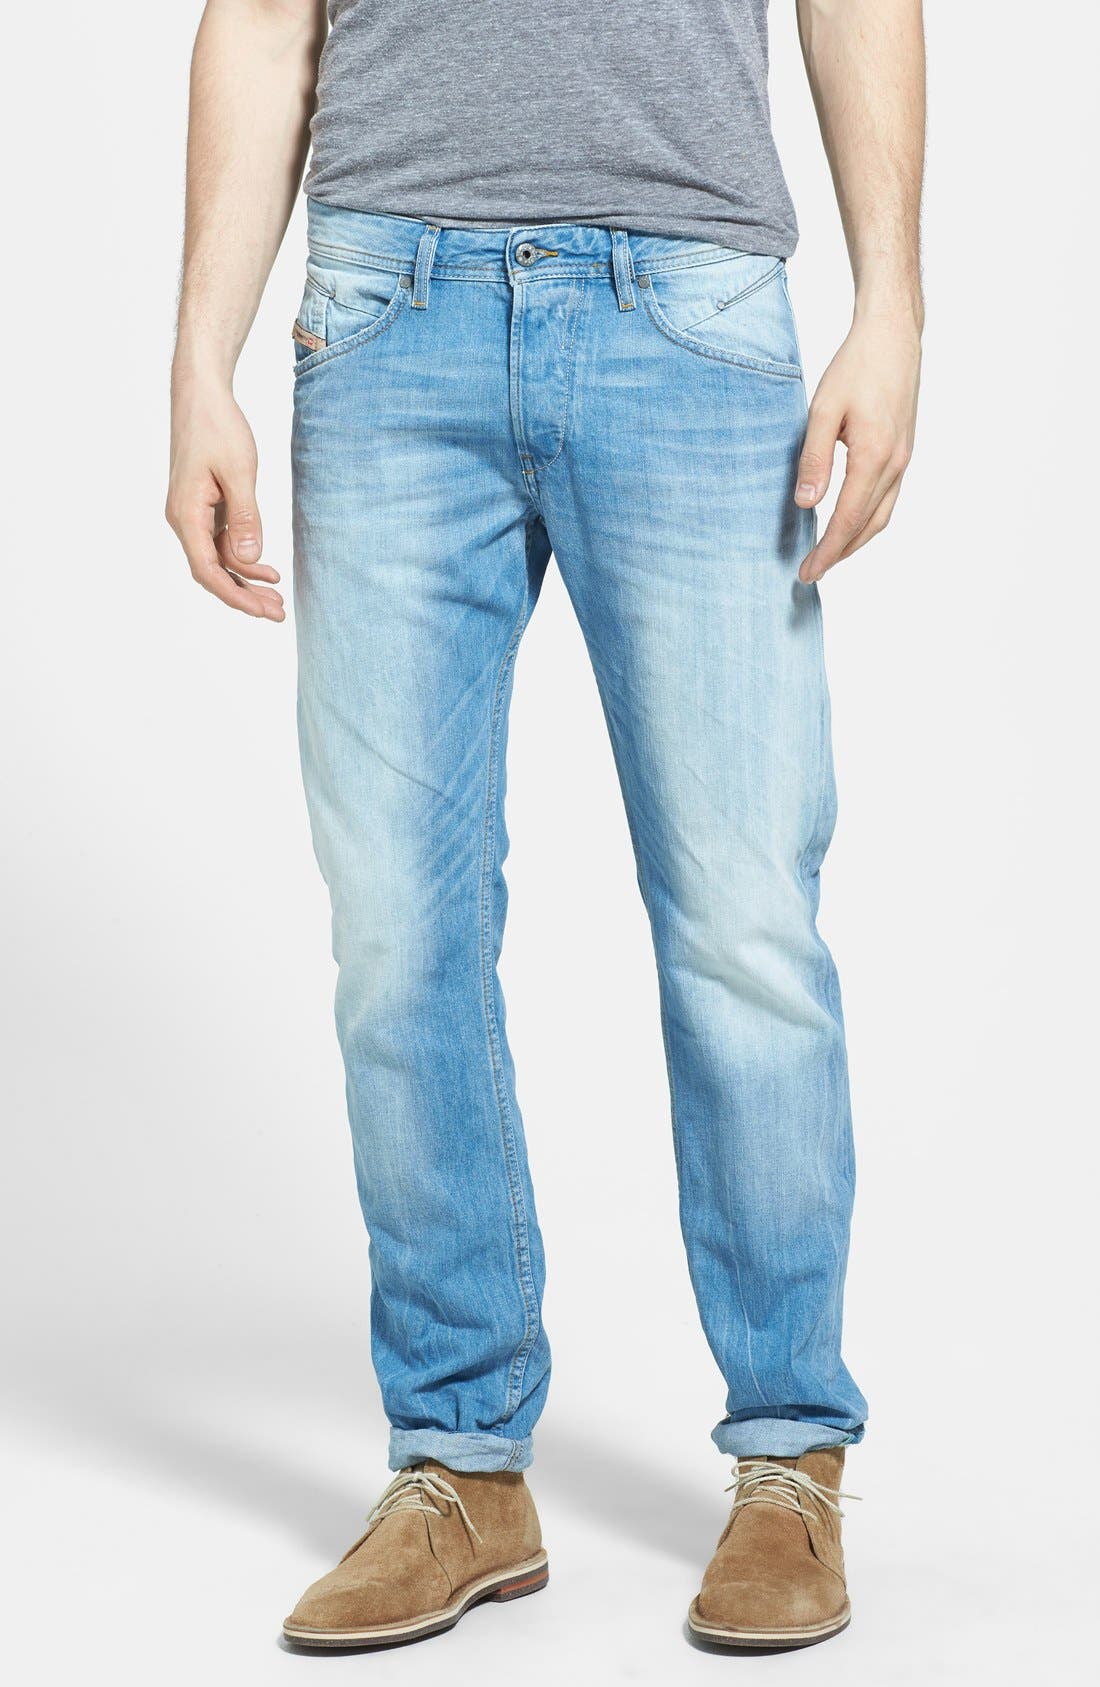 diesel belther jeans sale